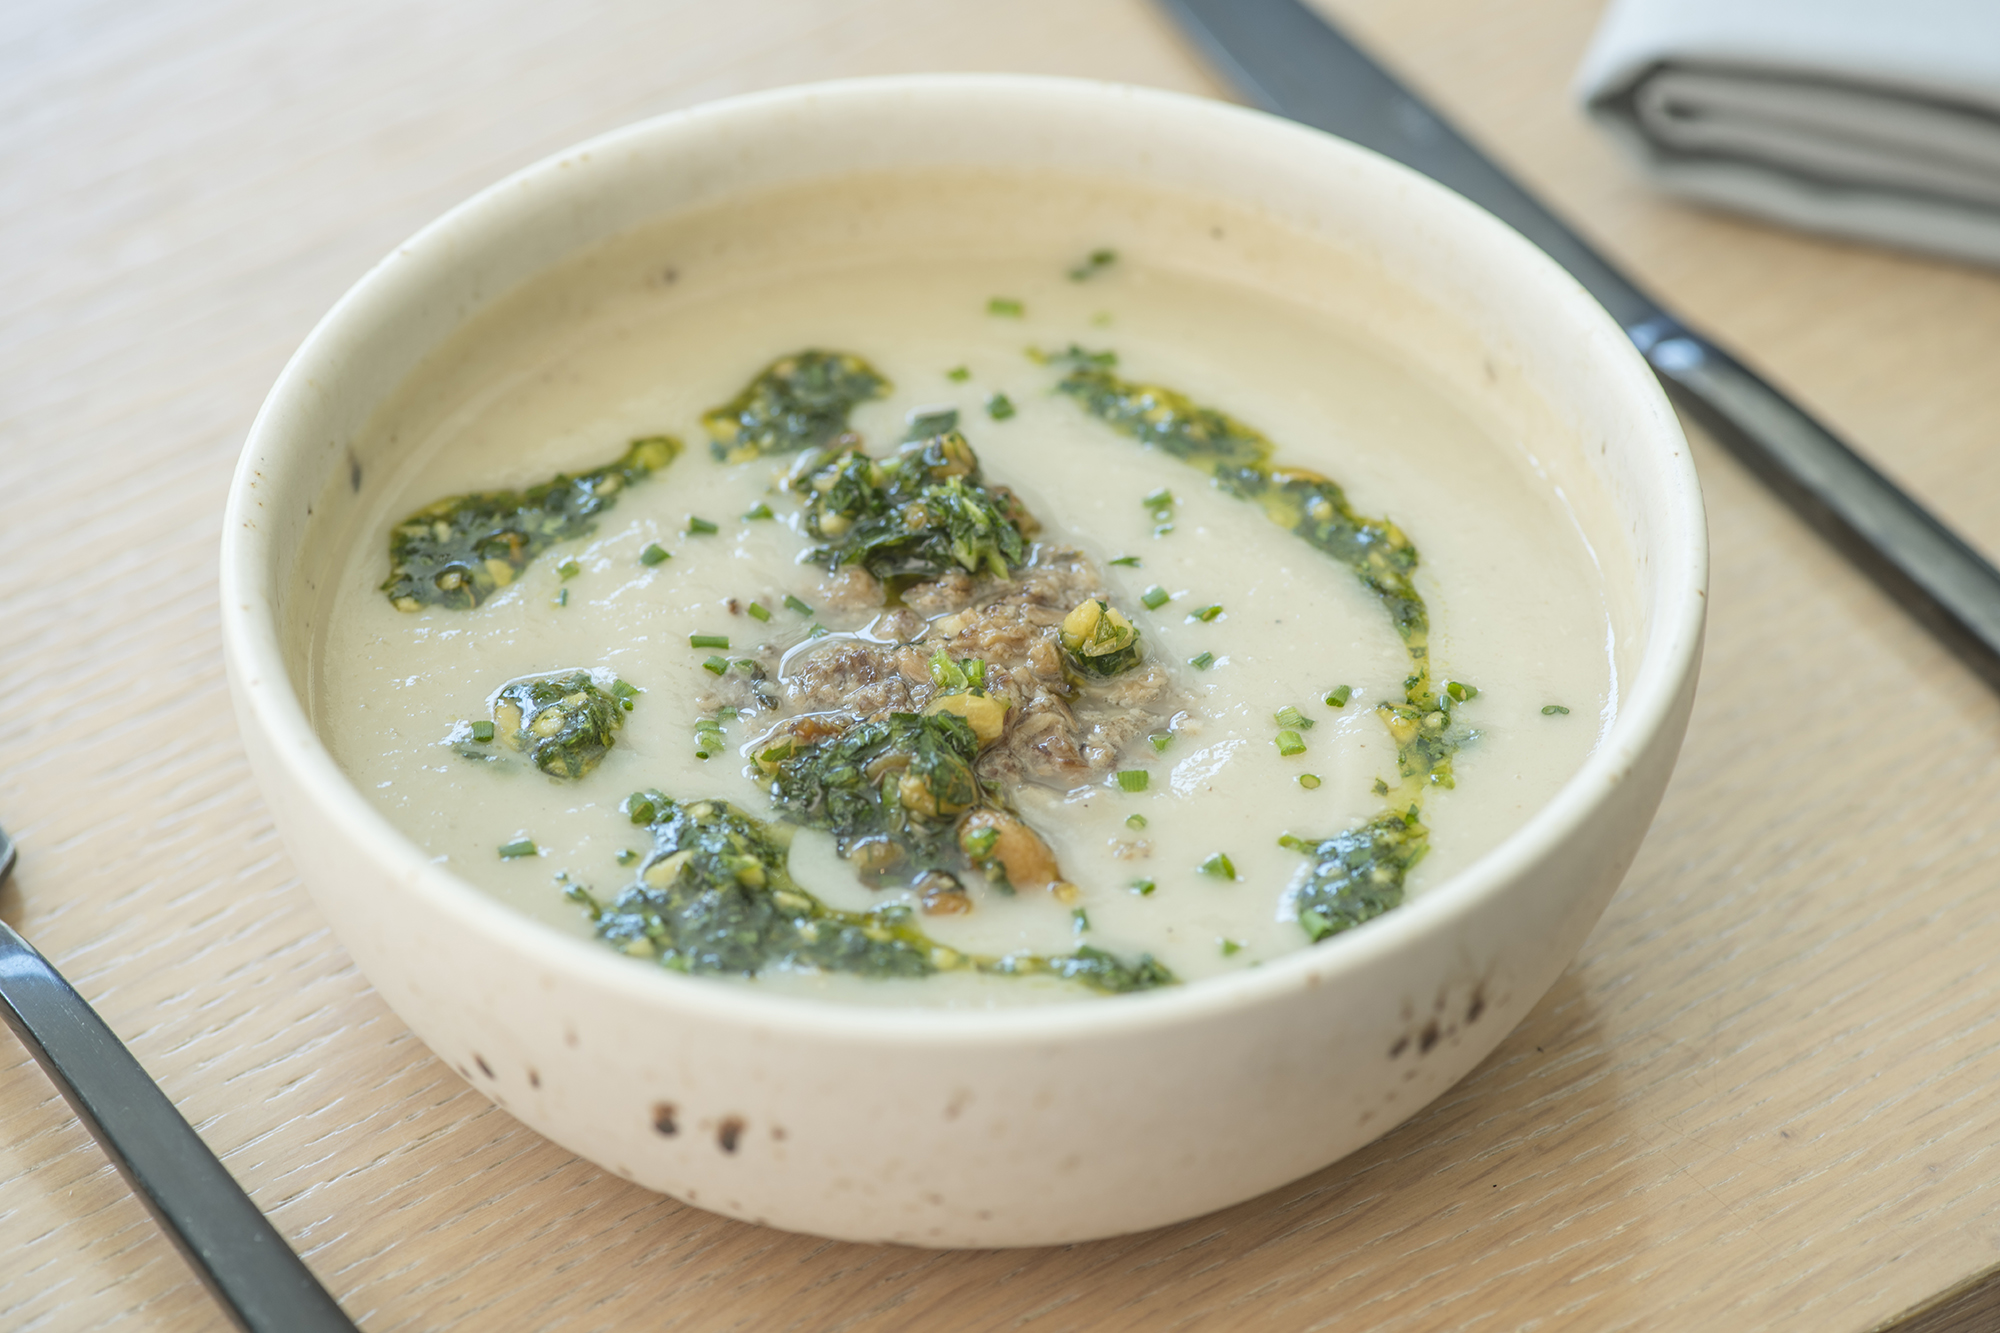  Warm celery root soup with mushroom duxelle, peanut gremolata at  Fausto at the CAC . || Image:  Twin Spire Photography  - Published: 10.2.2019 